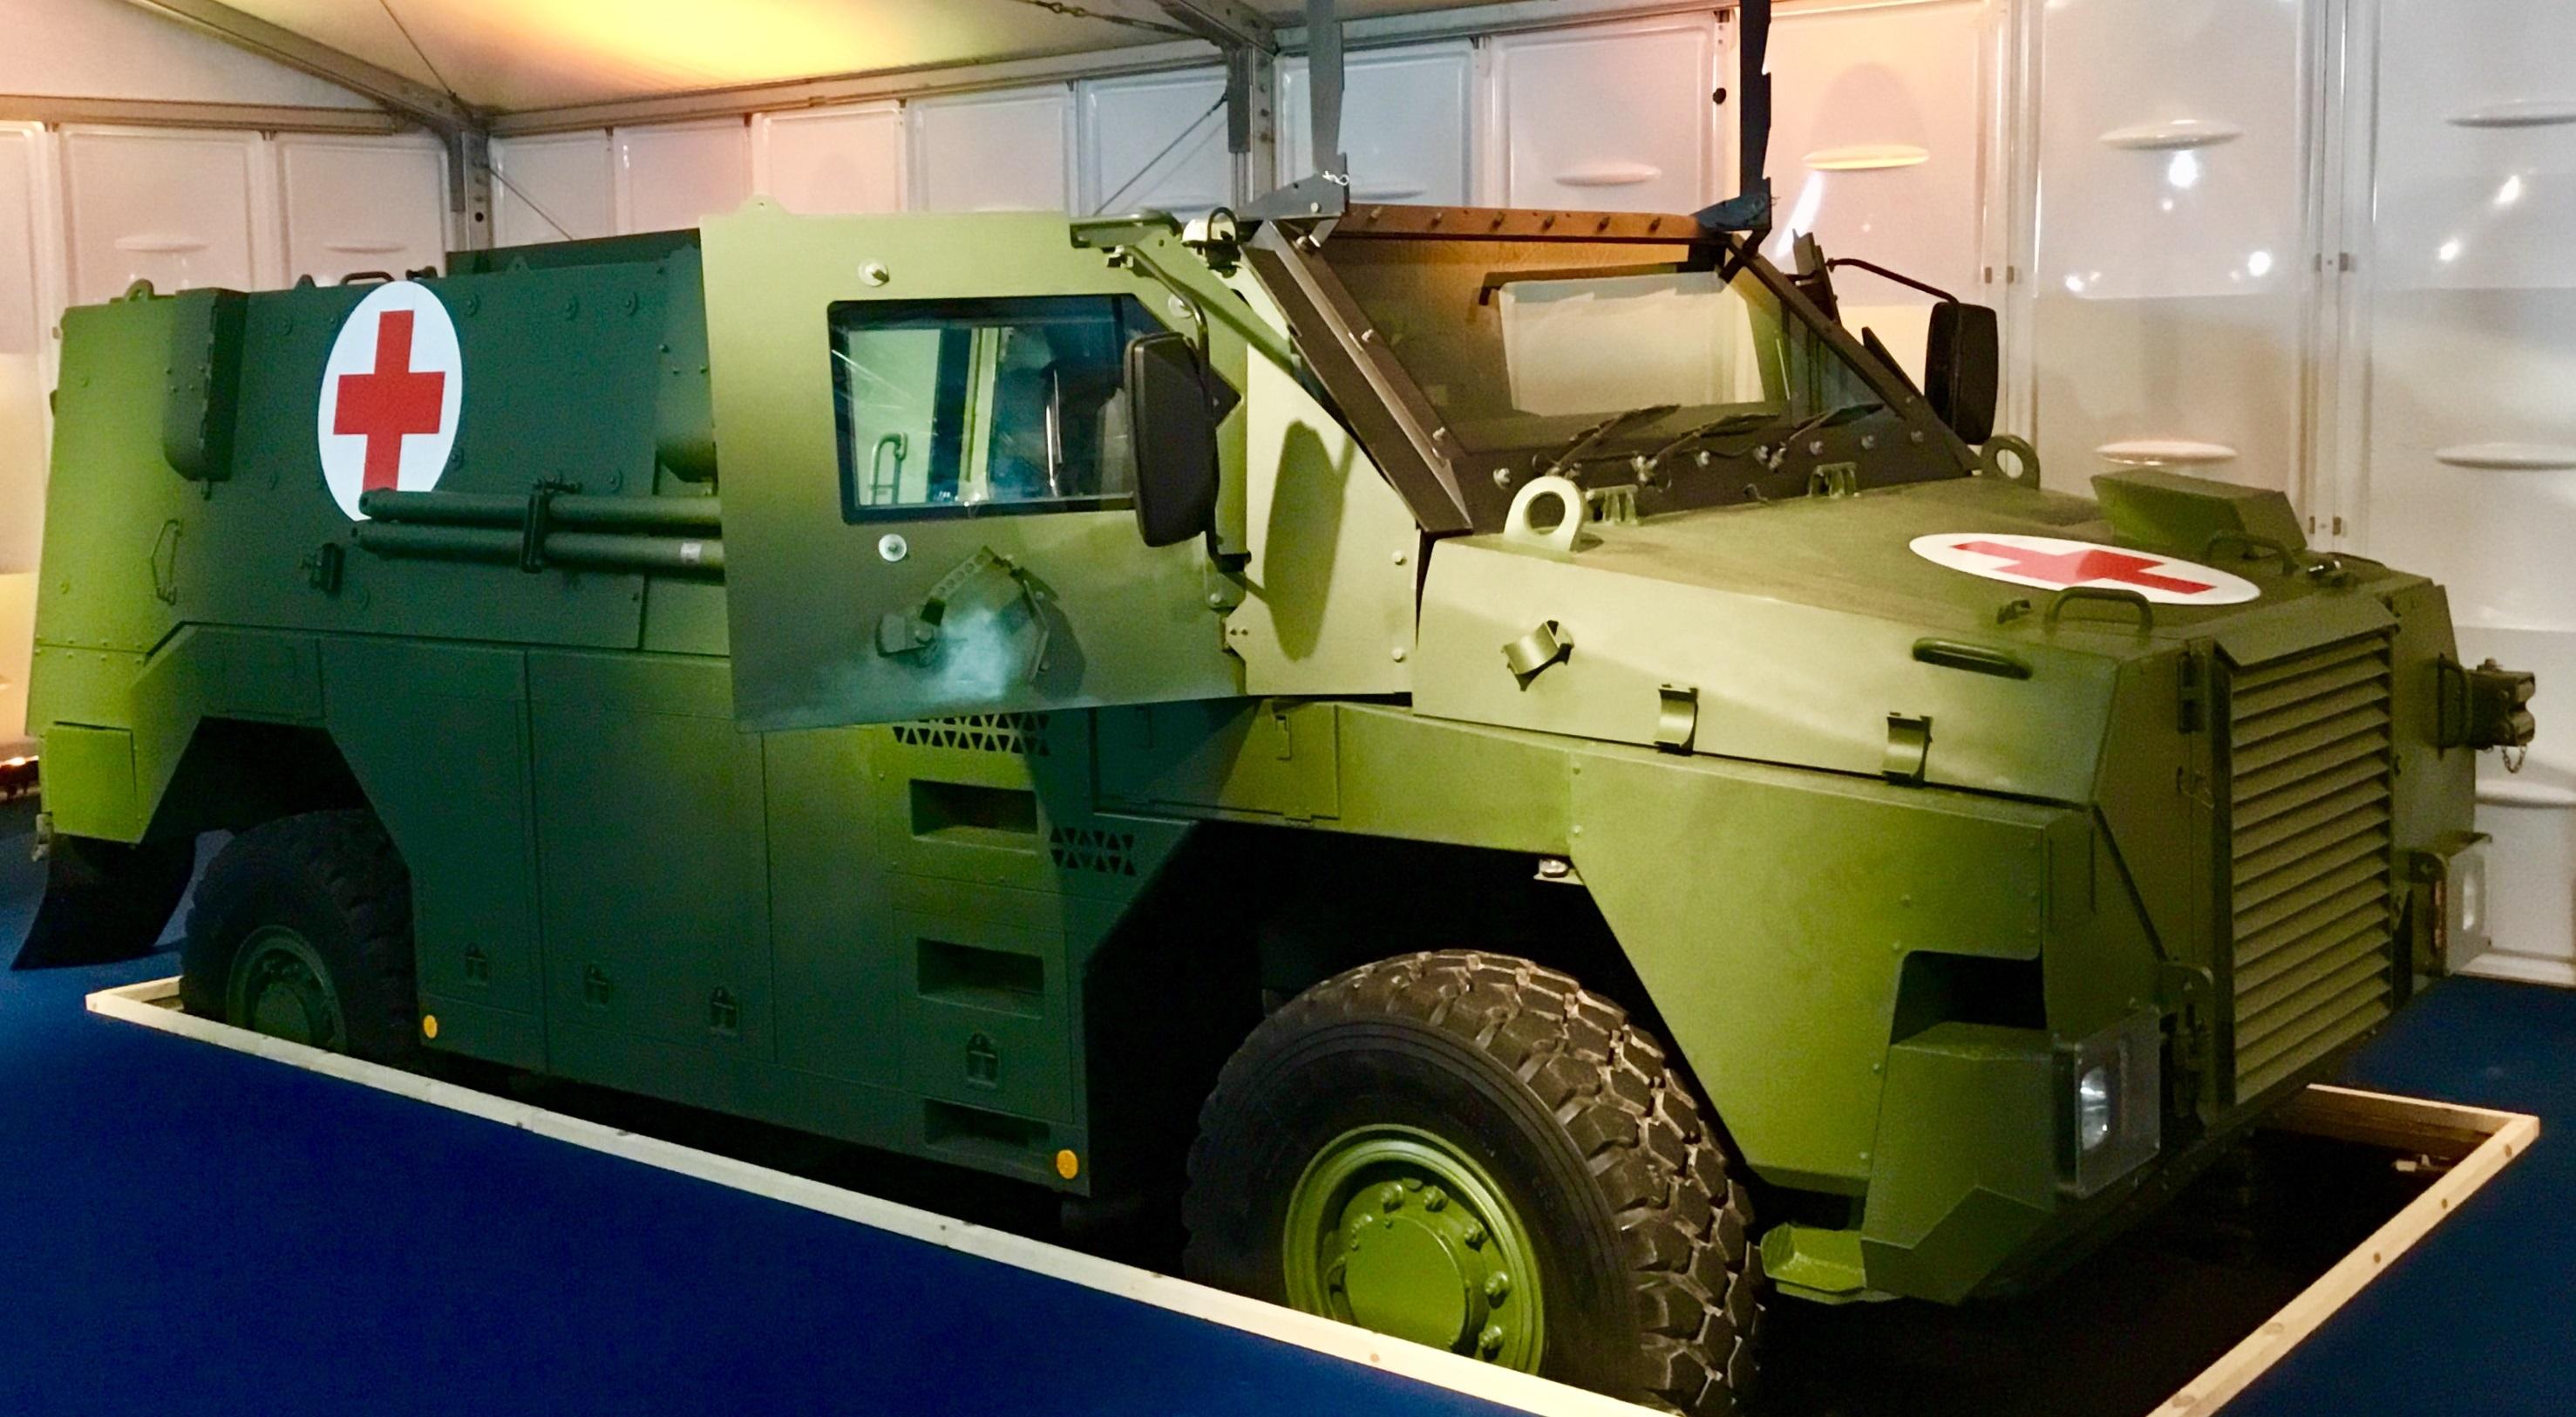 Thaless New Bushmaster Mr6 To Protect Soldiers Lives Thales Group